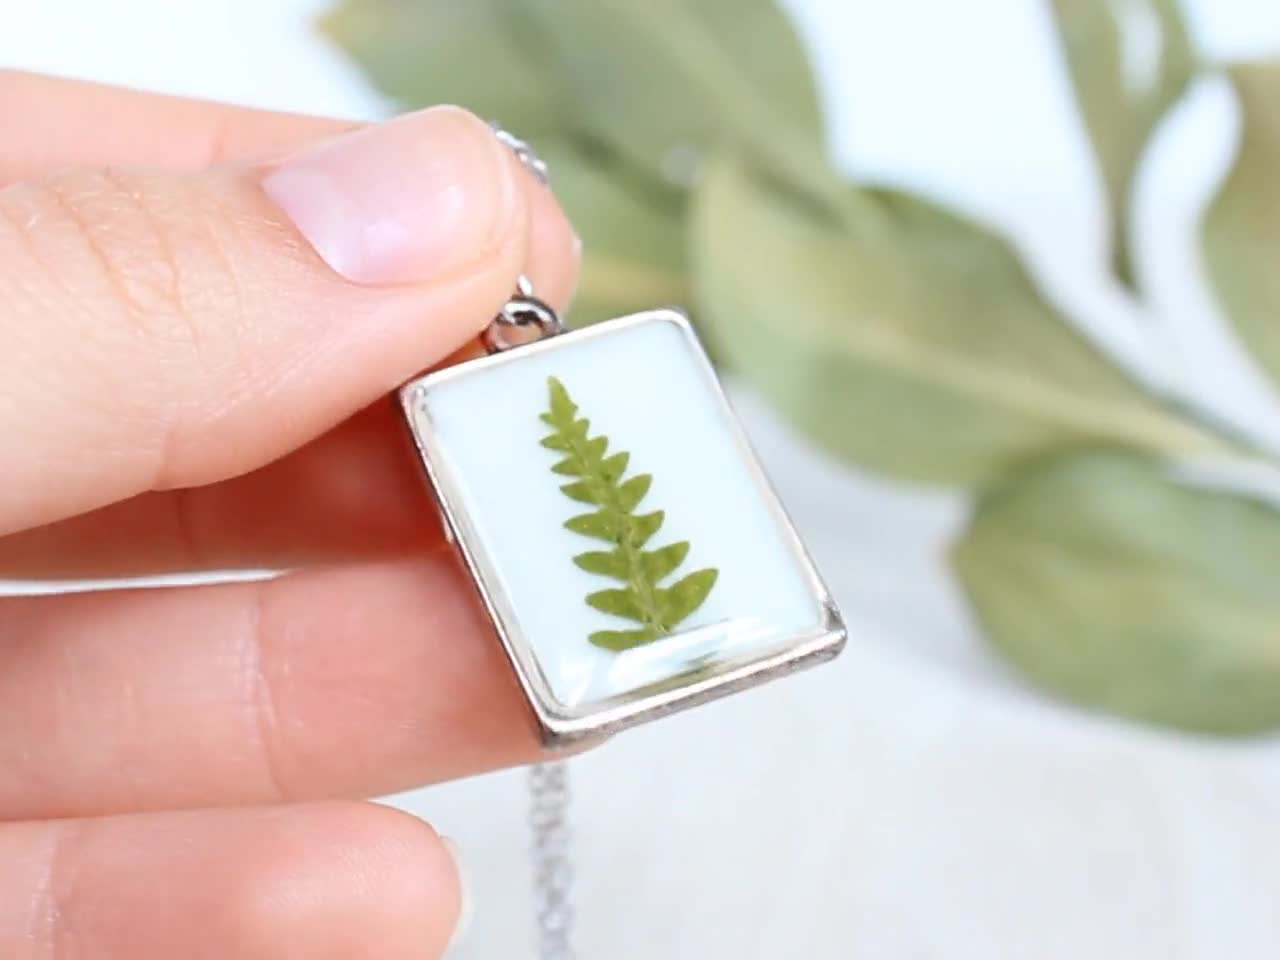 Pressed fern necklace, Double sided necklace, Rectangle necklace